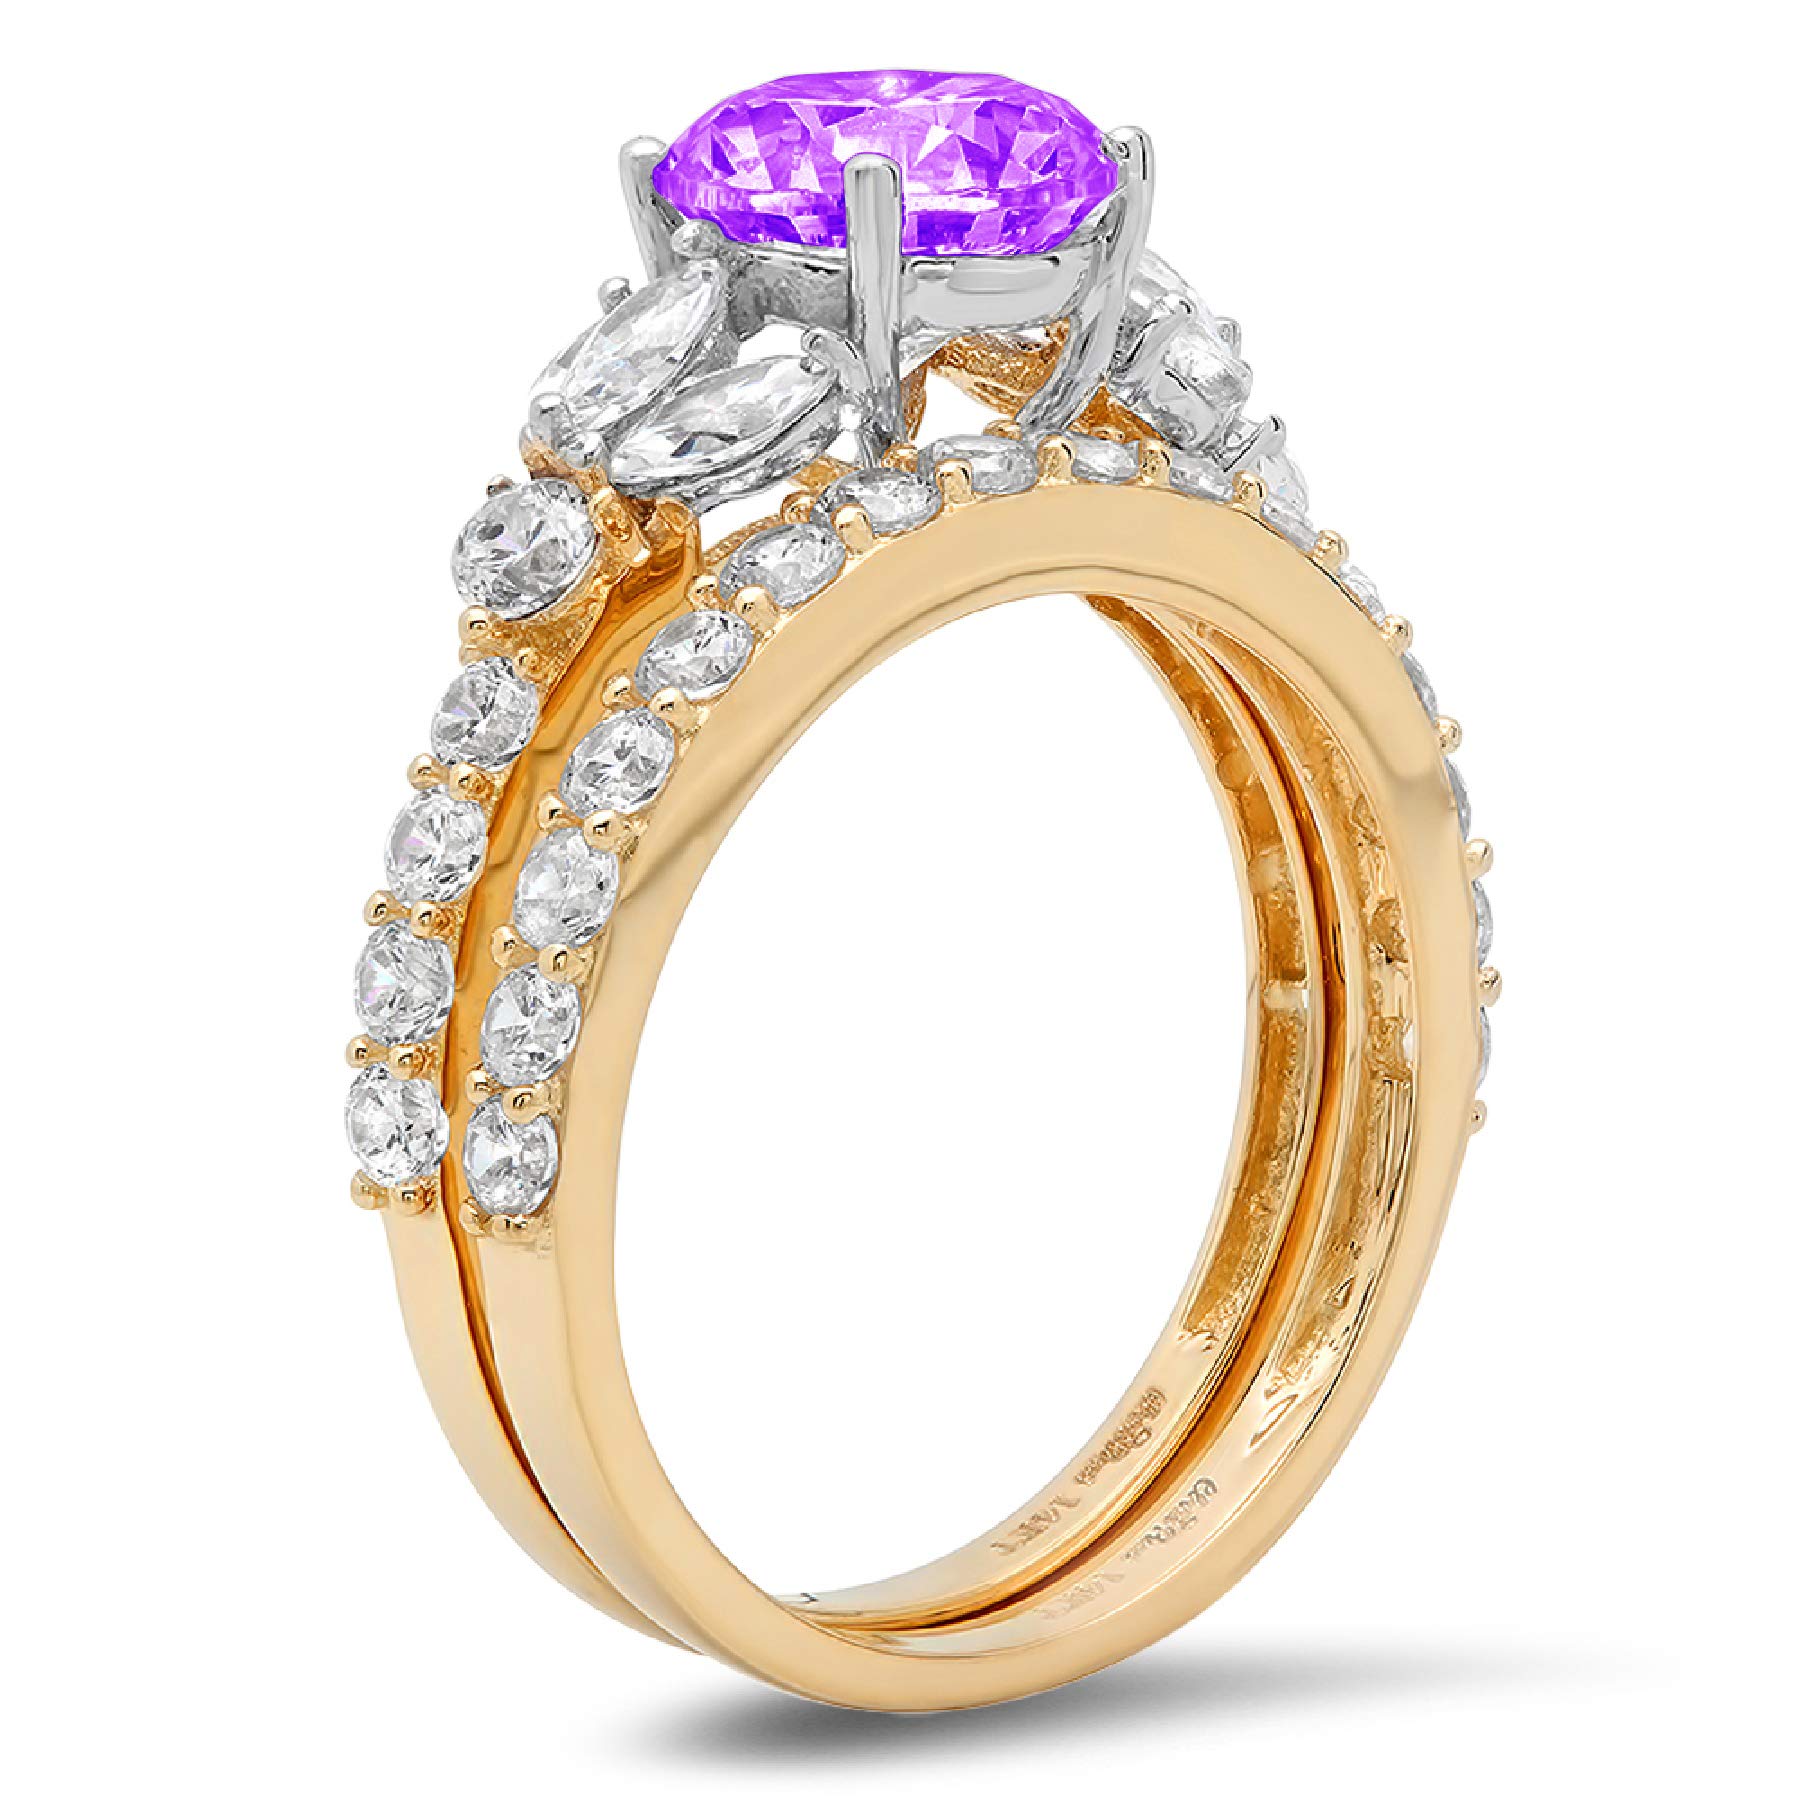 Clara Pucci 2.66ct Round Marquise Cut Solitaire 3 stone With Accent VVS1 Ideal Natural Purple Amethyst Engagement Promise Designer Anniversary Wedding Bridal Ring band set 14k 2 tone Gold